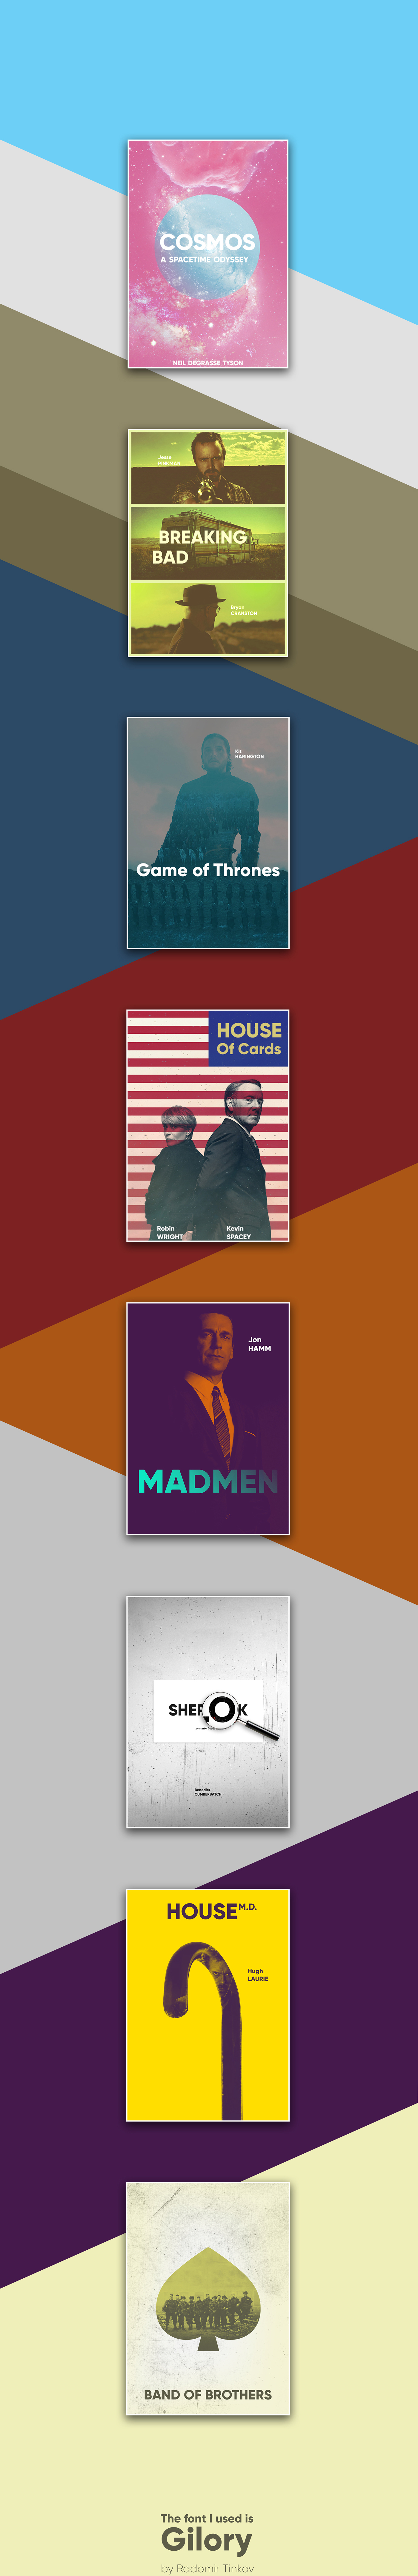 tv shows poster breaking bad cosmos house of cards house madmen Band Of Brothers Fan Art